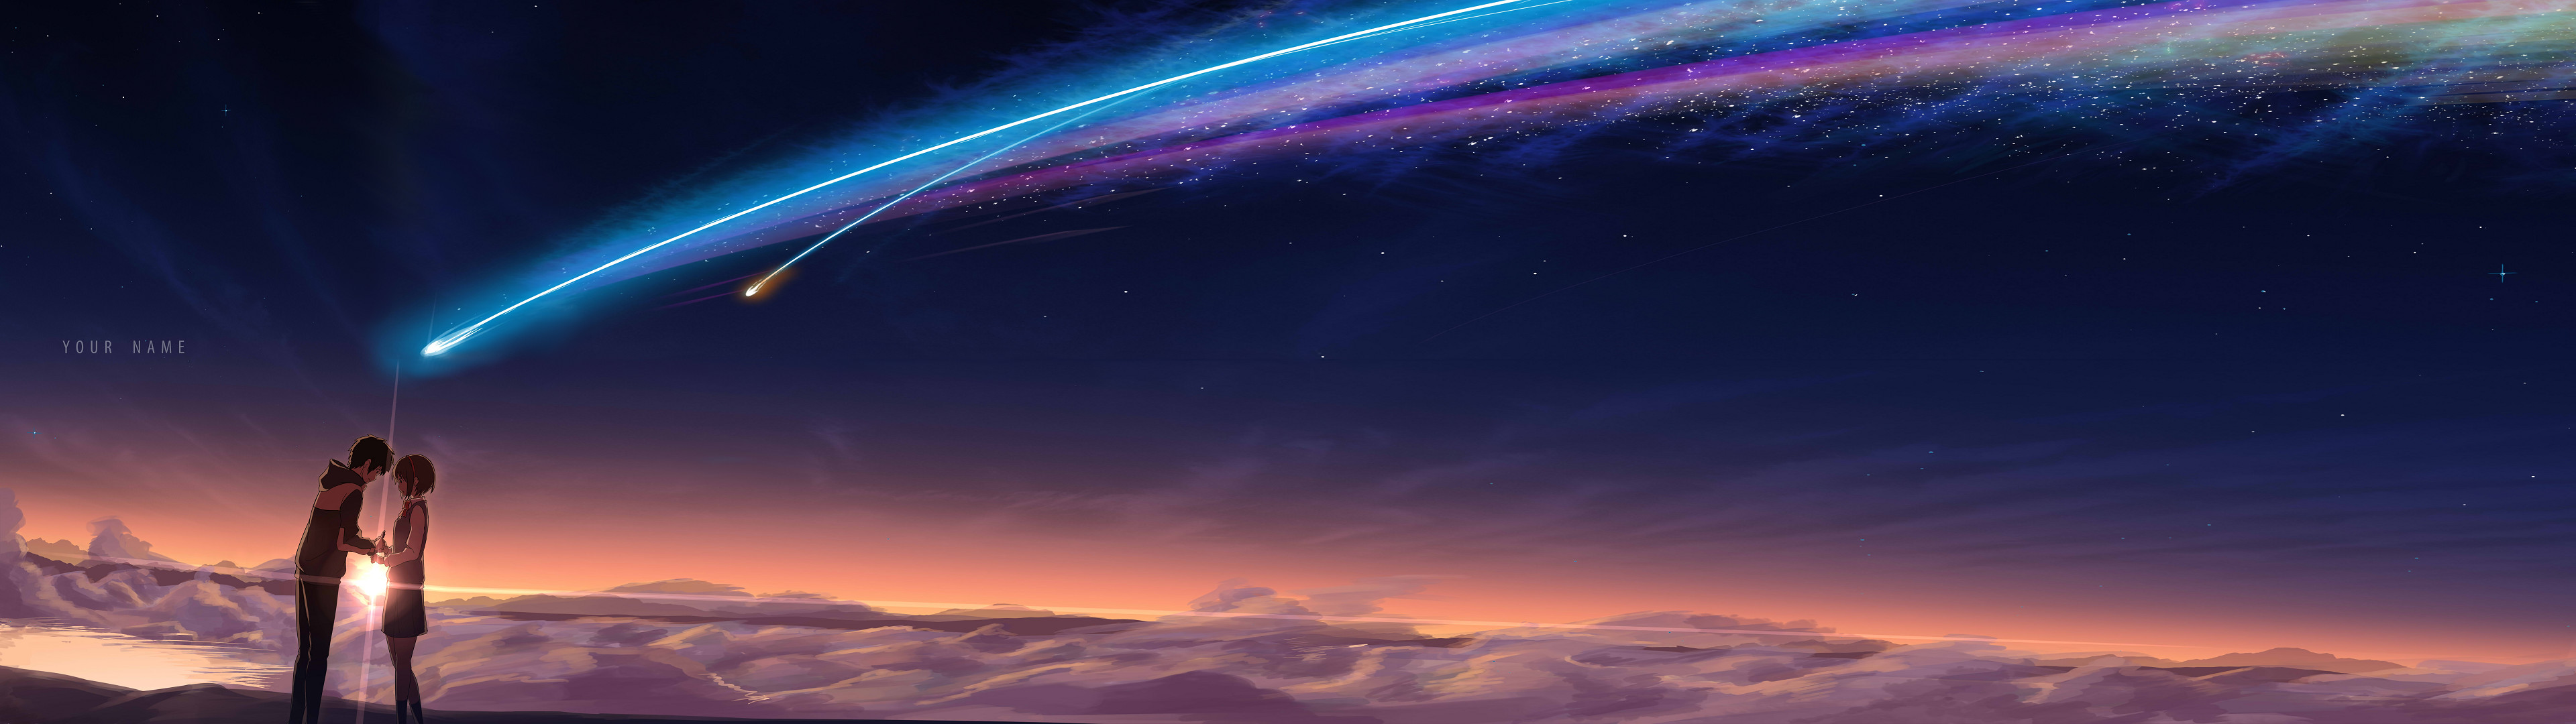 [3840×1080] Kimi no na wa. Your Name. Hastily done dual monitor edit of a  widely available wallpaper.